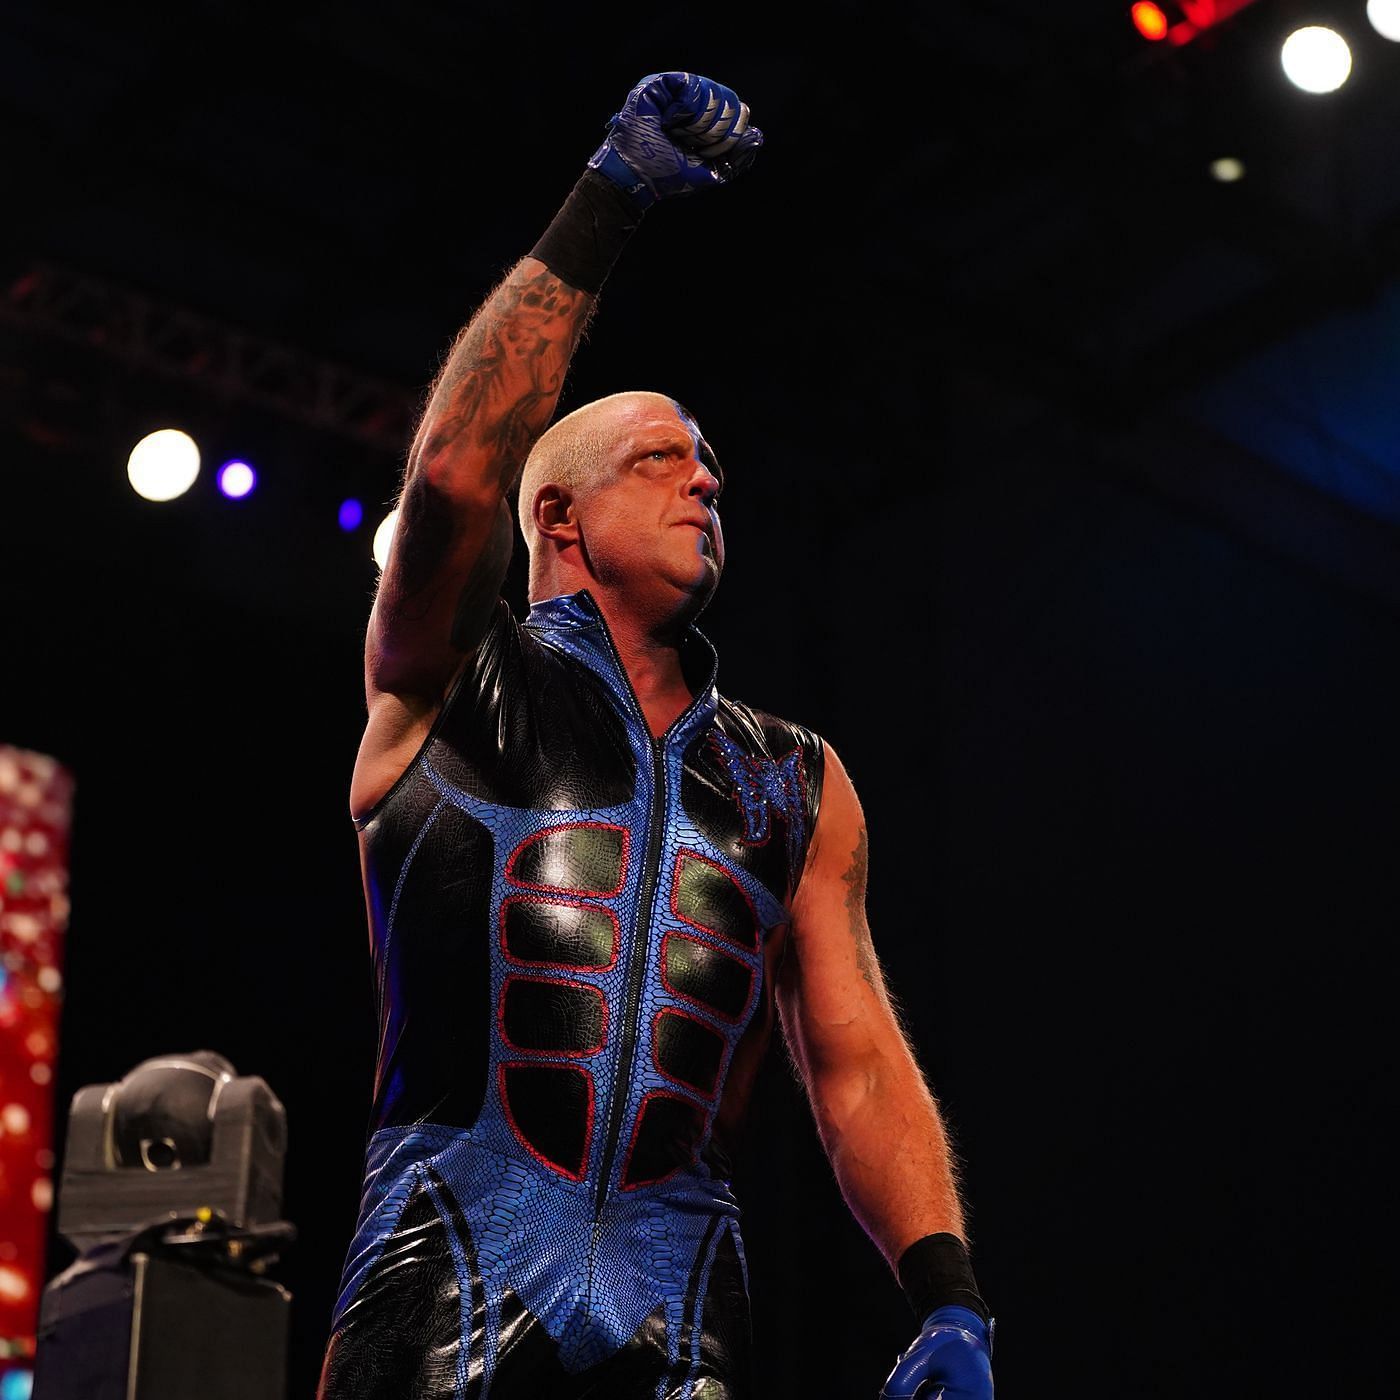 Dustin Rhodes recently talked about his past problems with drug addiction